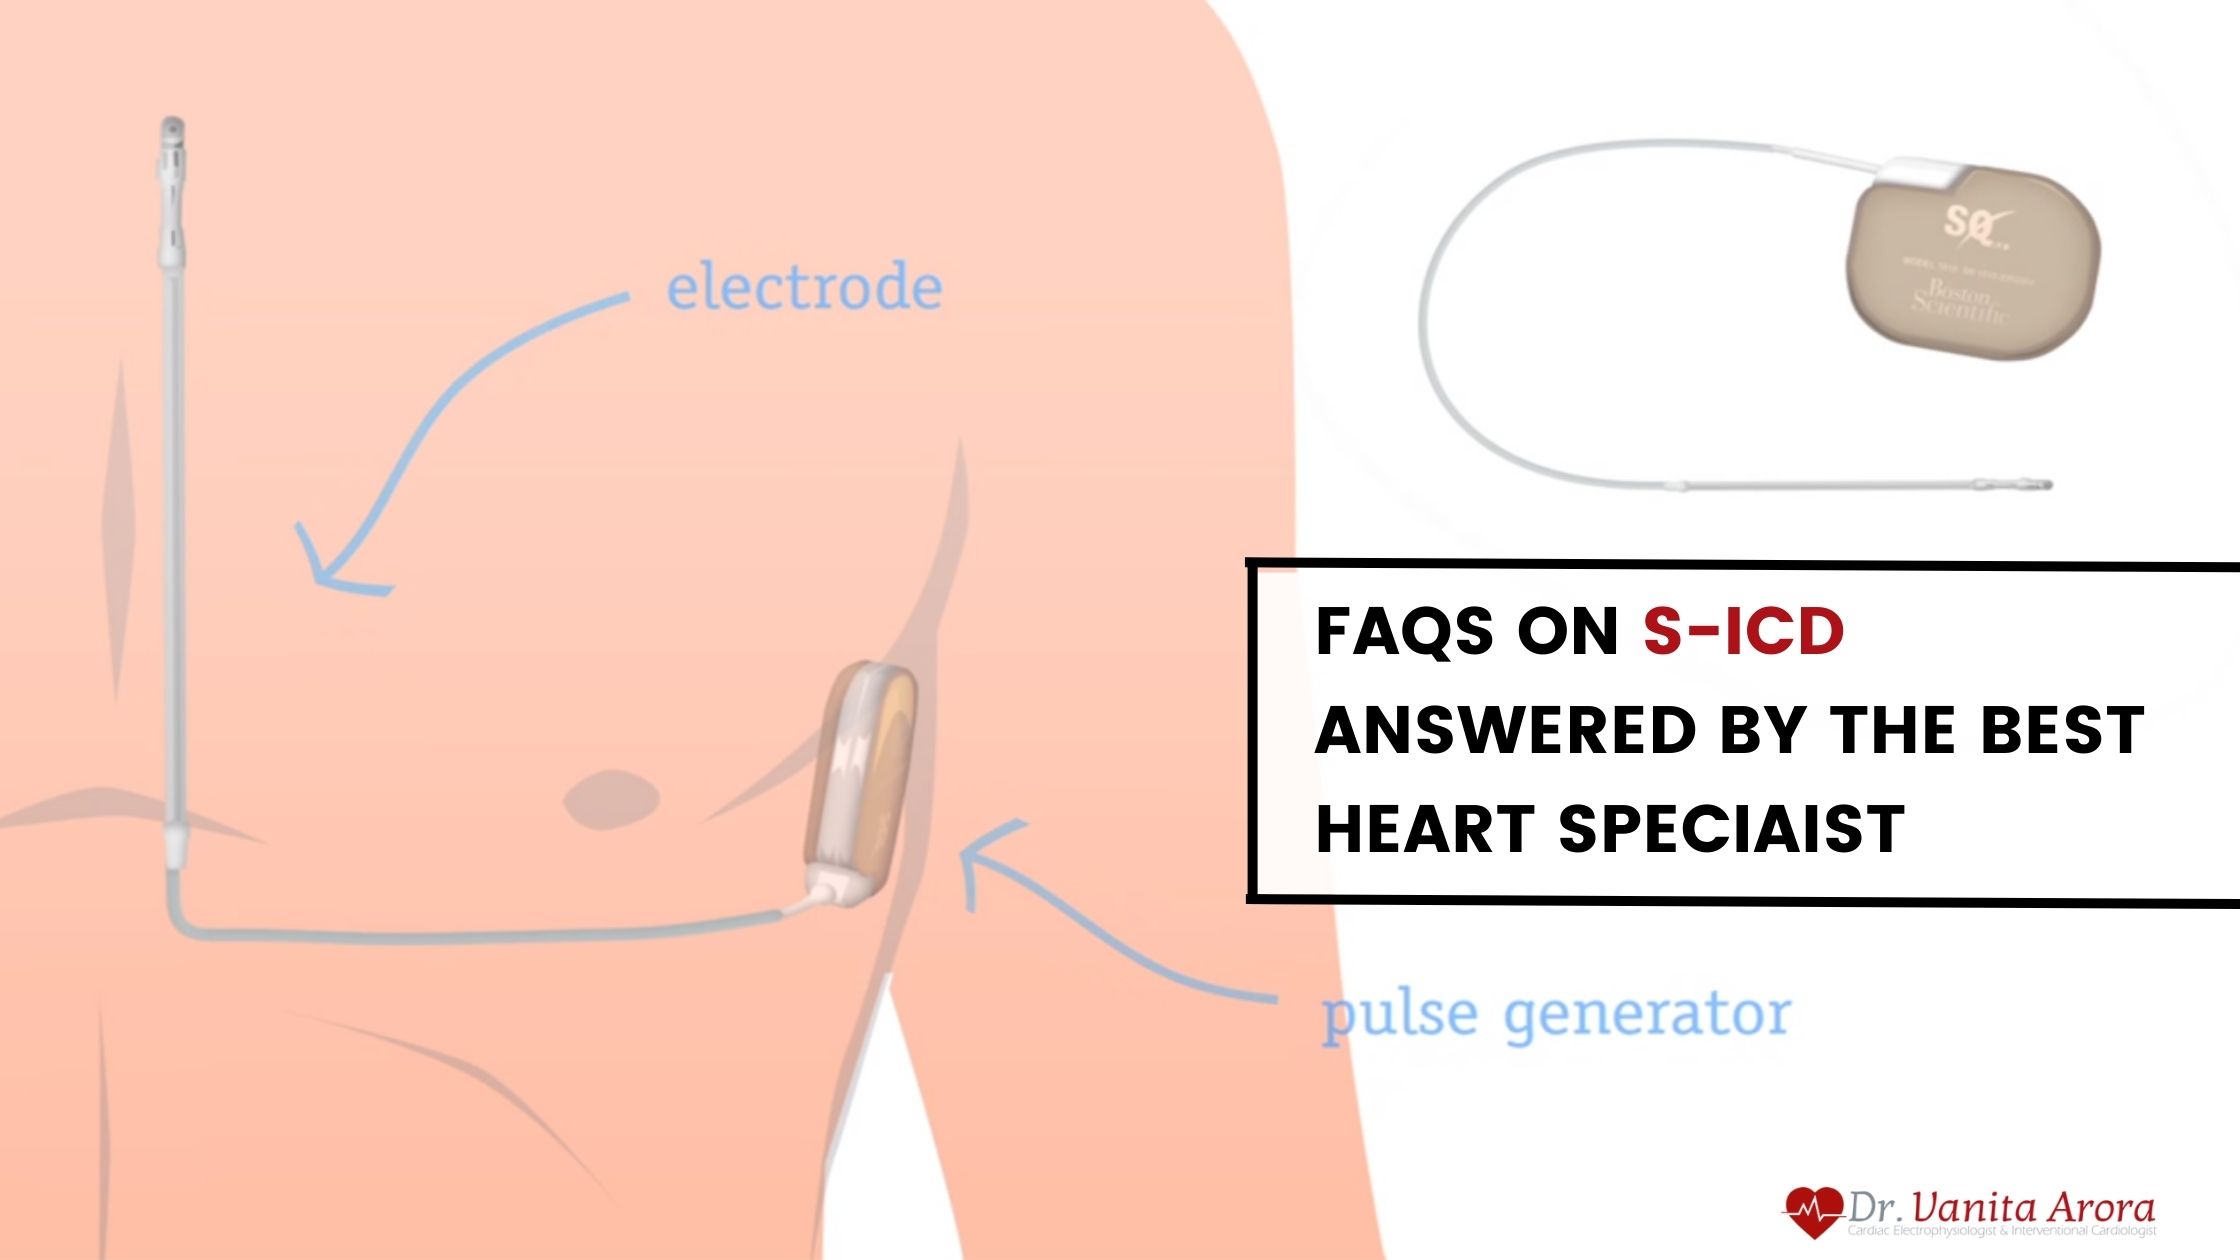 FAQs on S-ICD by Best Heart Specialist in Delhi